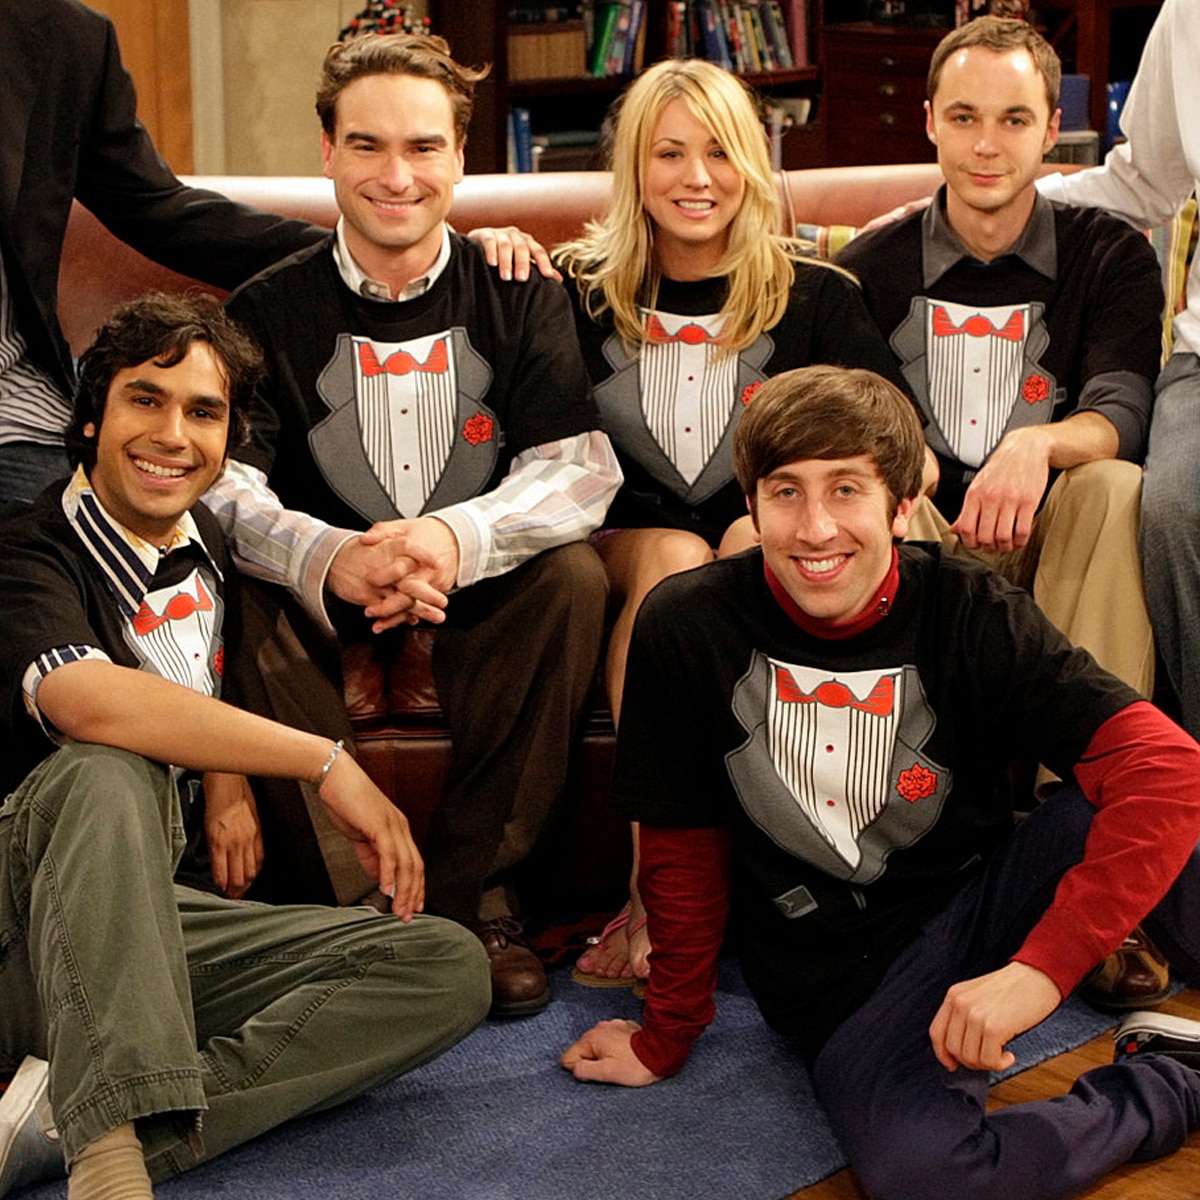 New The Big Bang Theory Project Is in the Works at